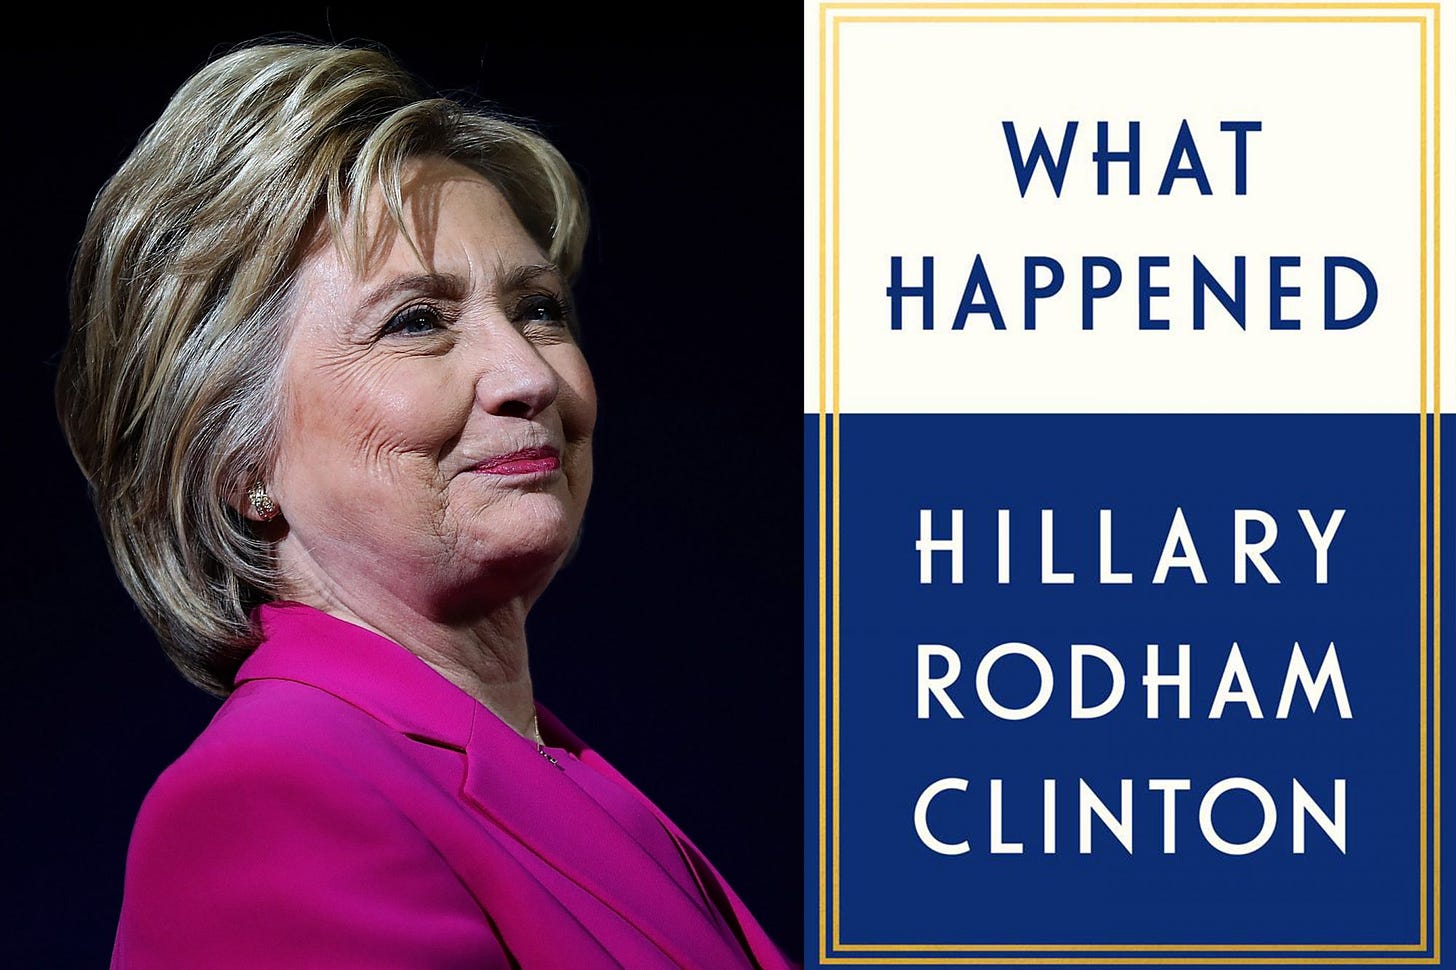 Hillary Clinton&#39;s &#39;What Happened&#39;: Most revealing lines | EW.com